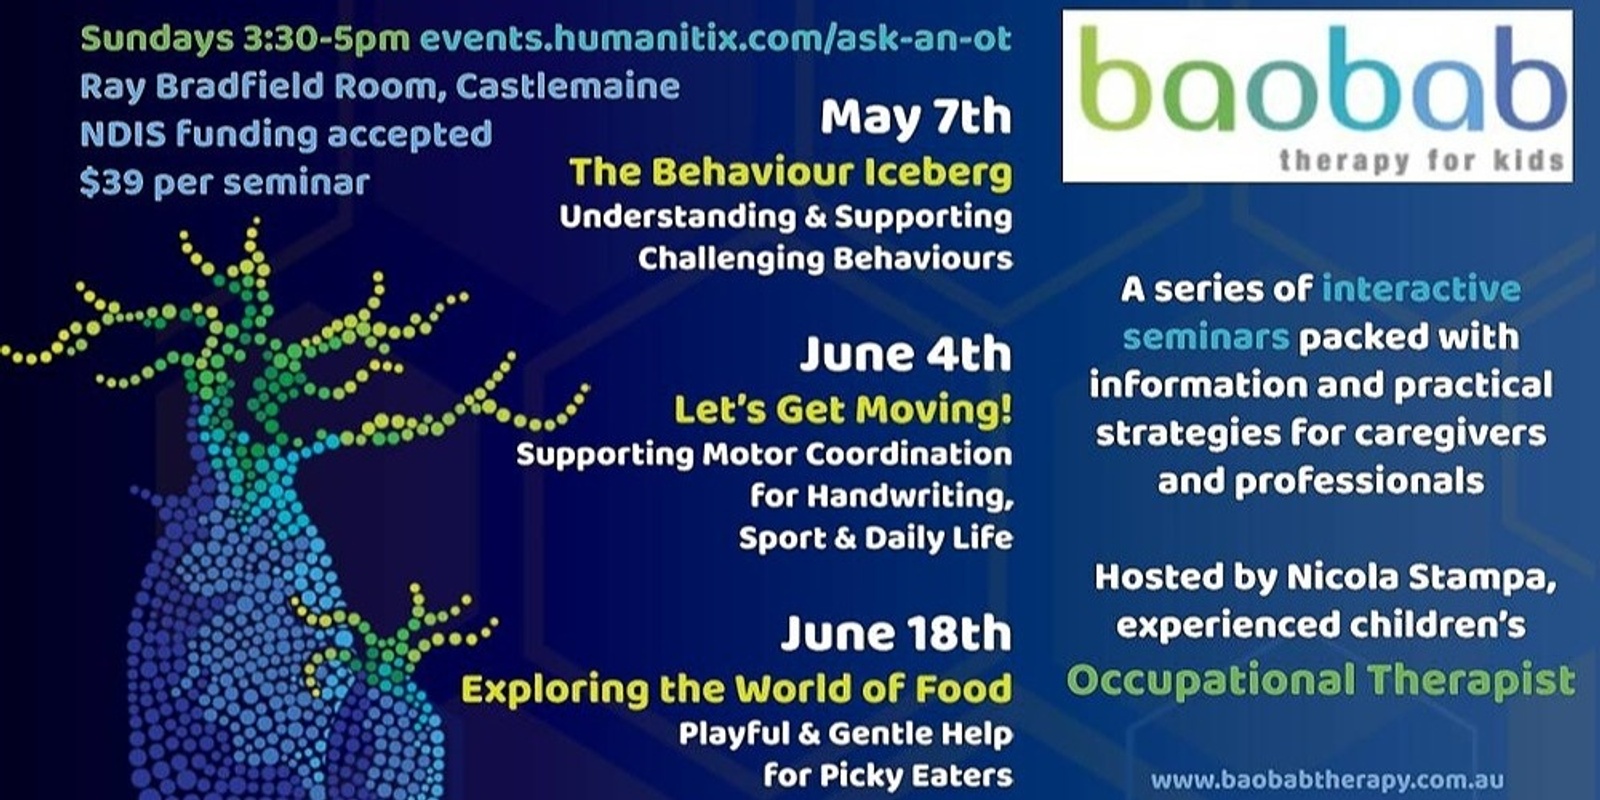 Banner image for Ask an OT: Interactive Seminars for Families, Caregivers & Professionals - Castlemaine